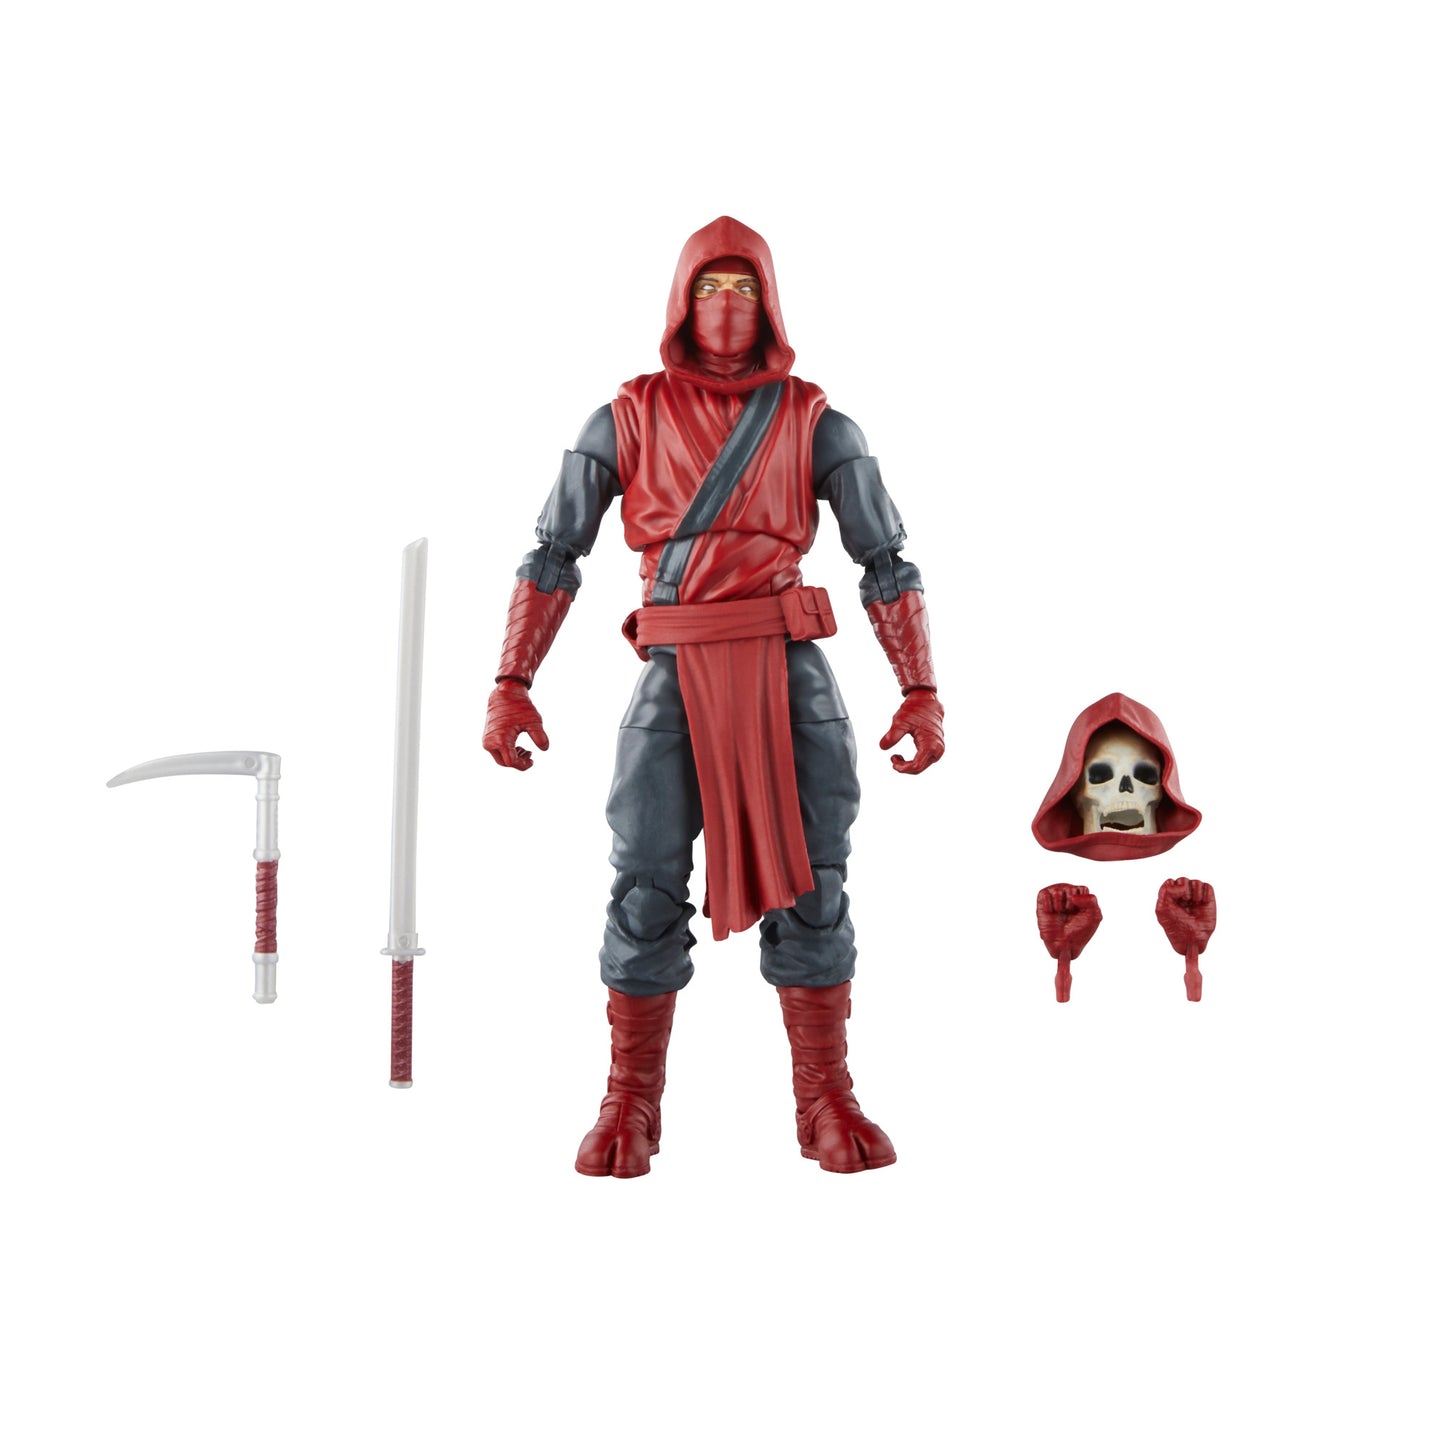 Hasbro Marvel Legends Series The Fist Ninja Action Figure Toy with all accessories - Heretoserveyou